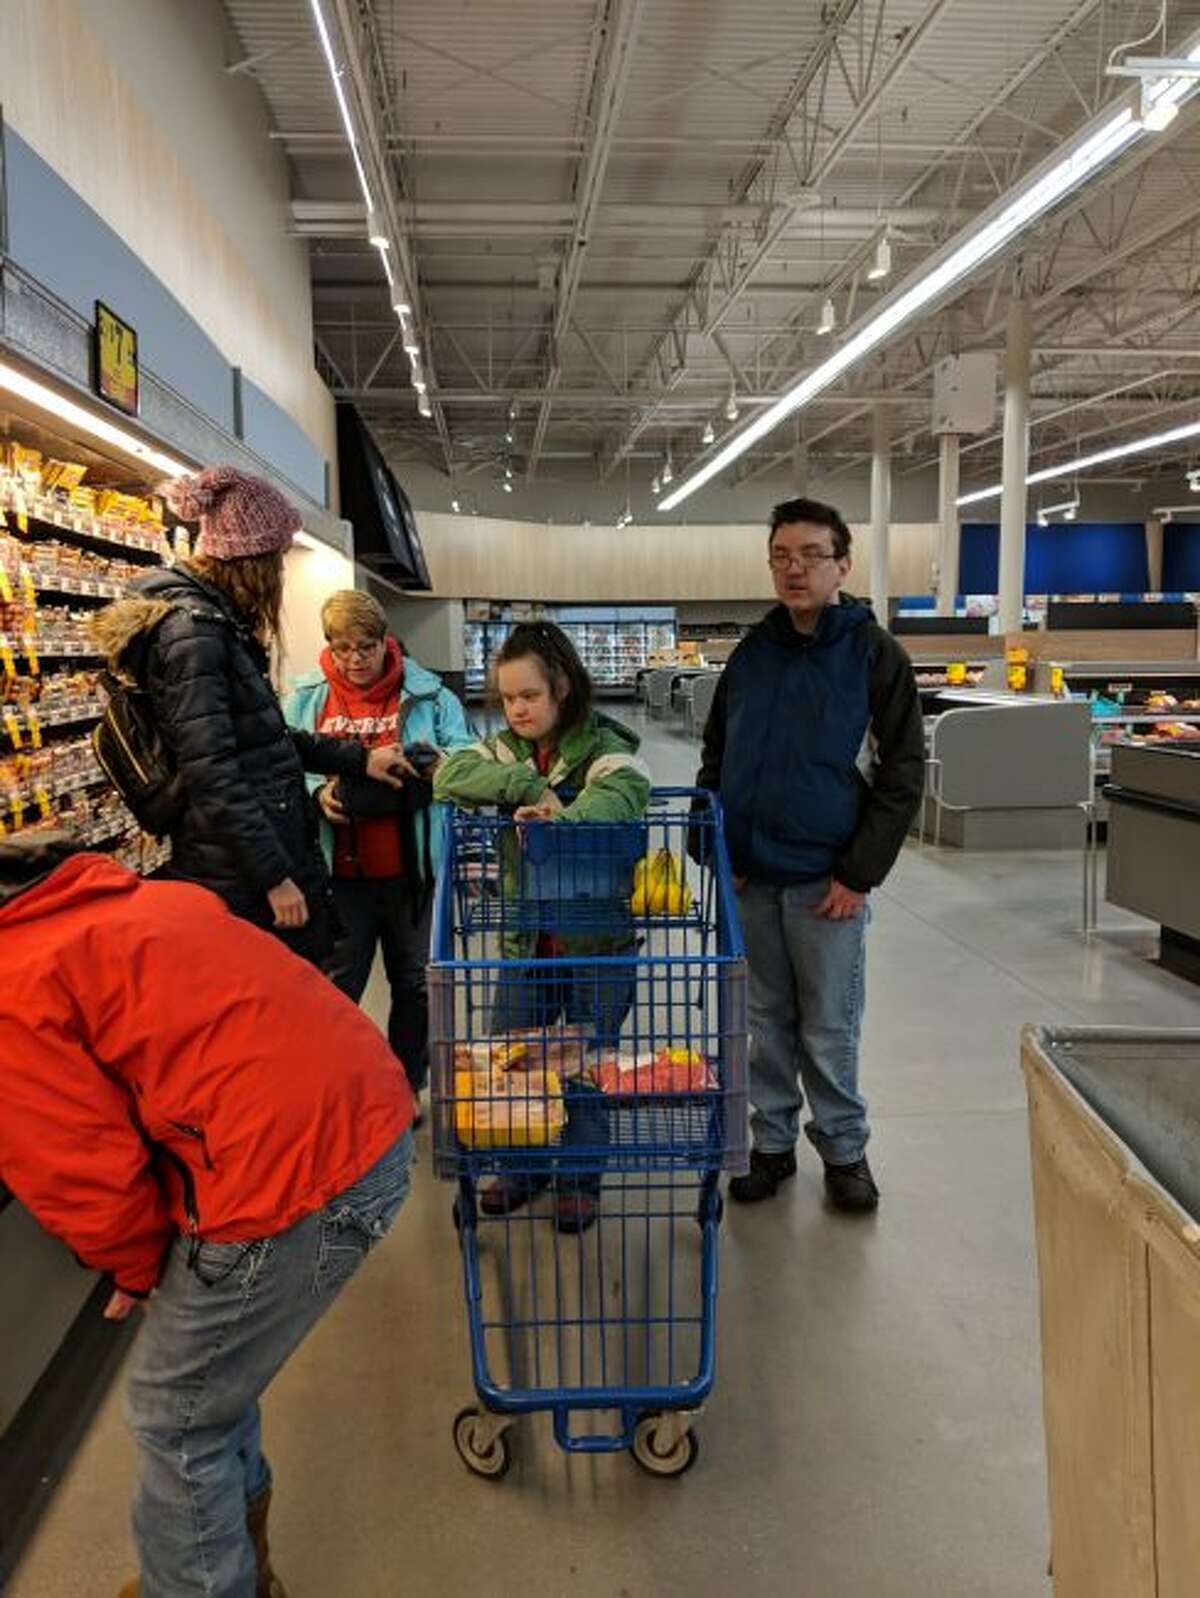 Learning to live on your own means being able to purchase food for yourself and students are shown at the Meijer Store learning how to pick out food items.